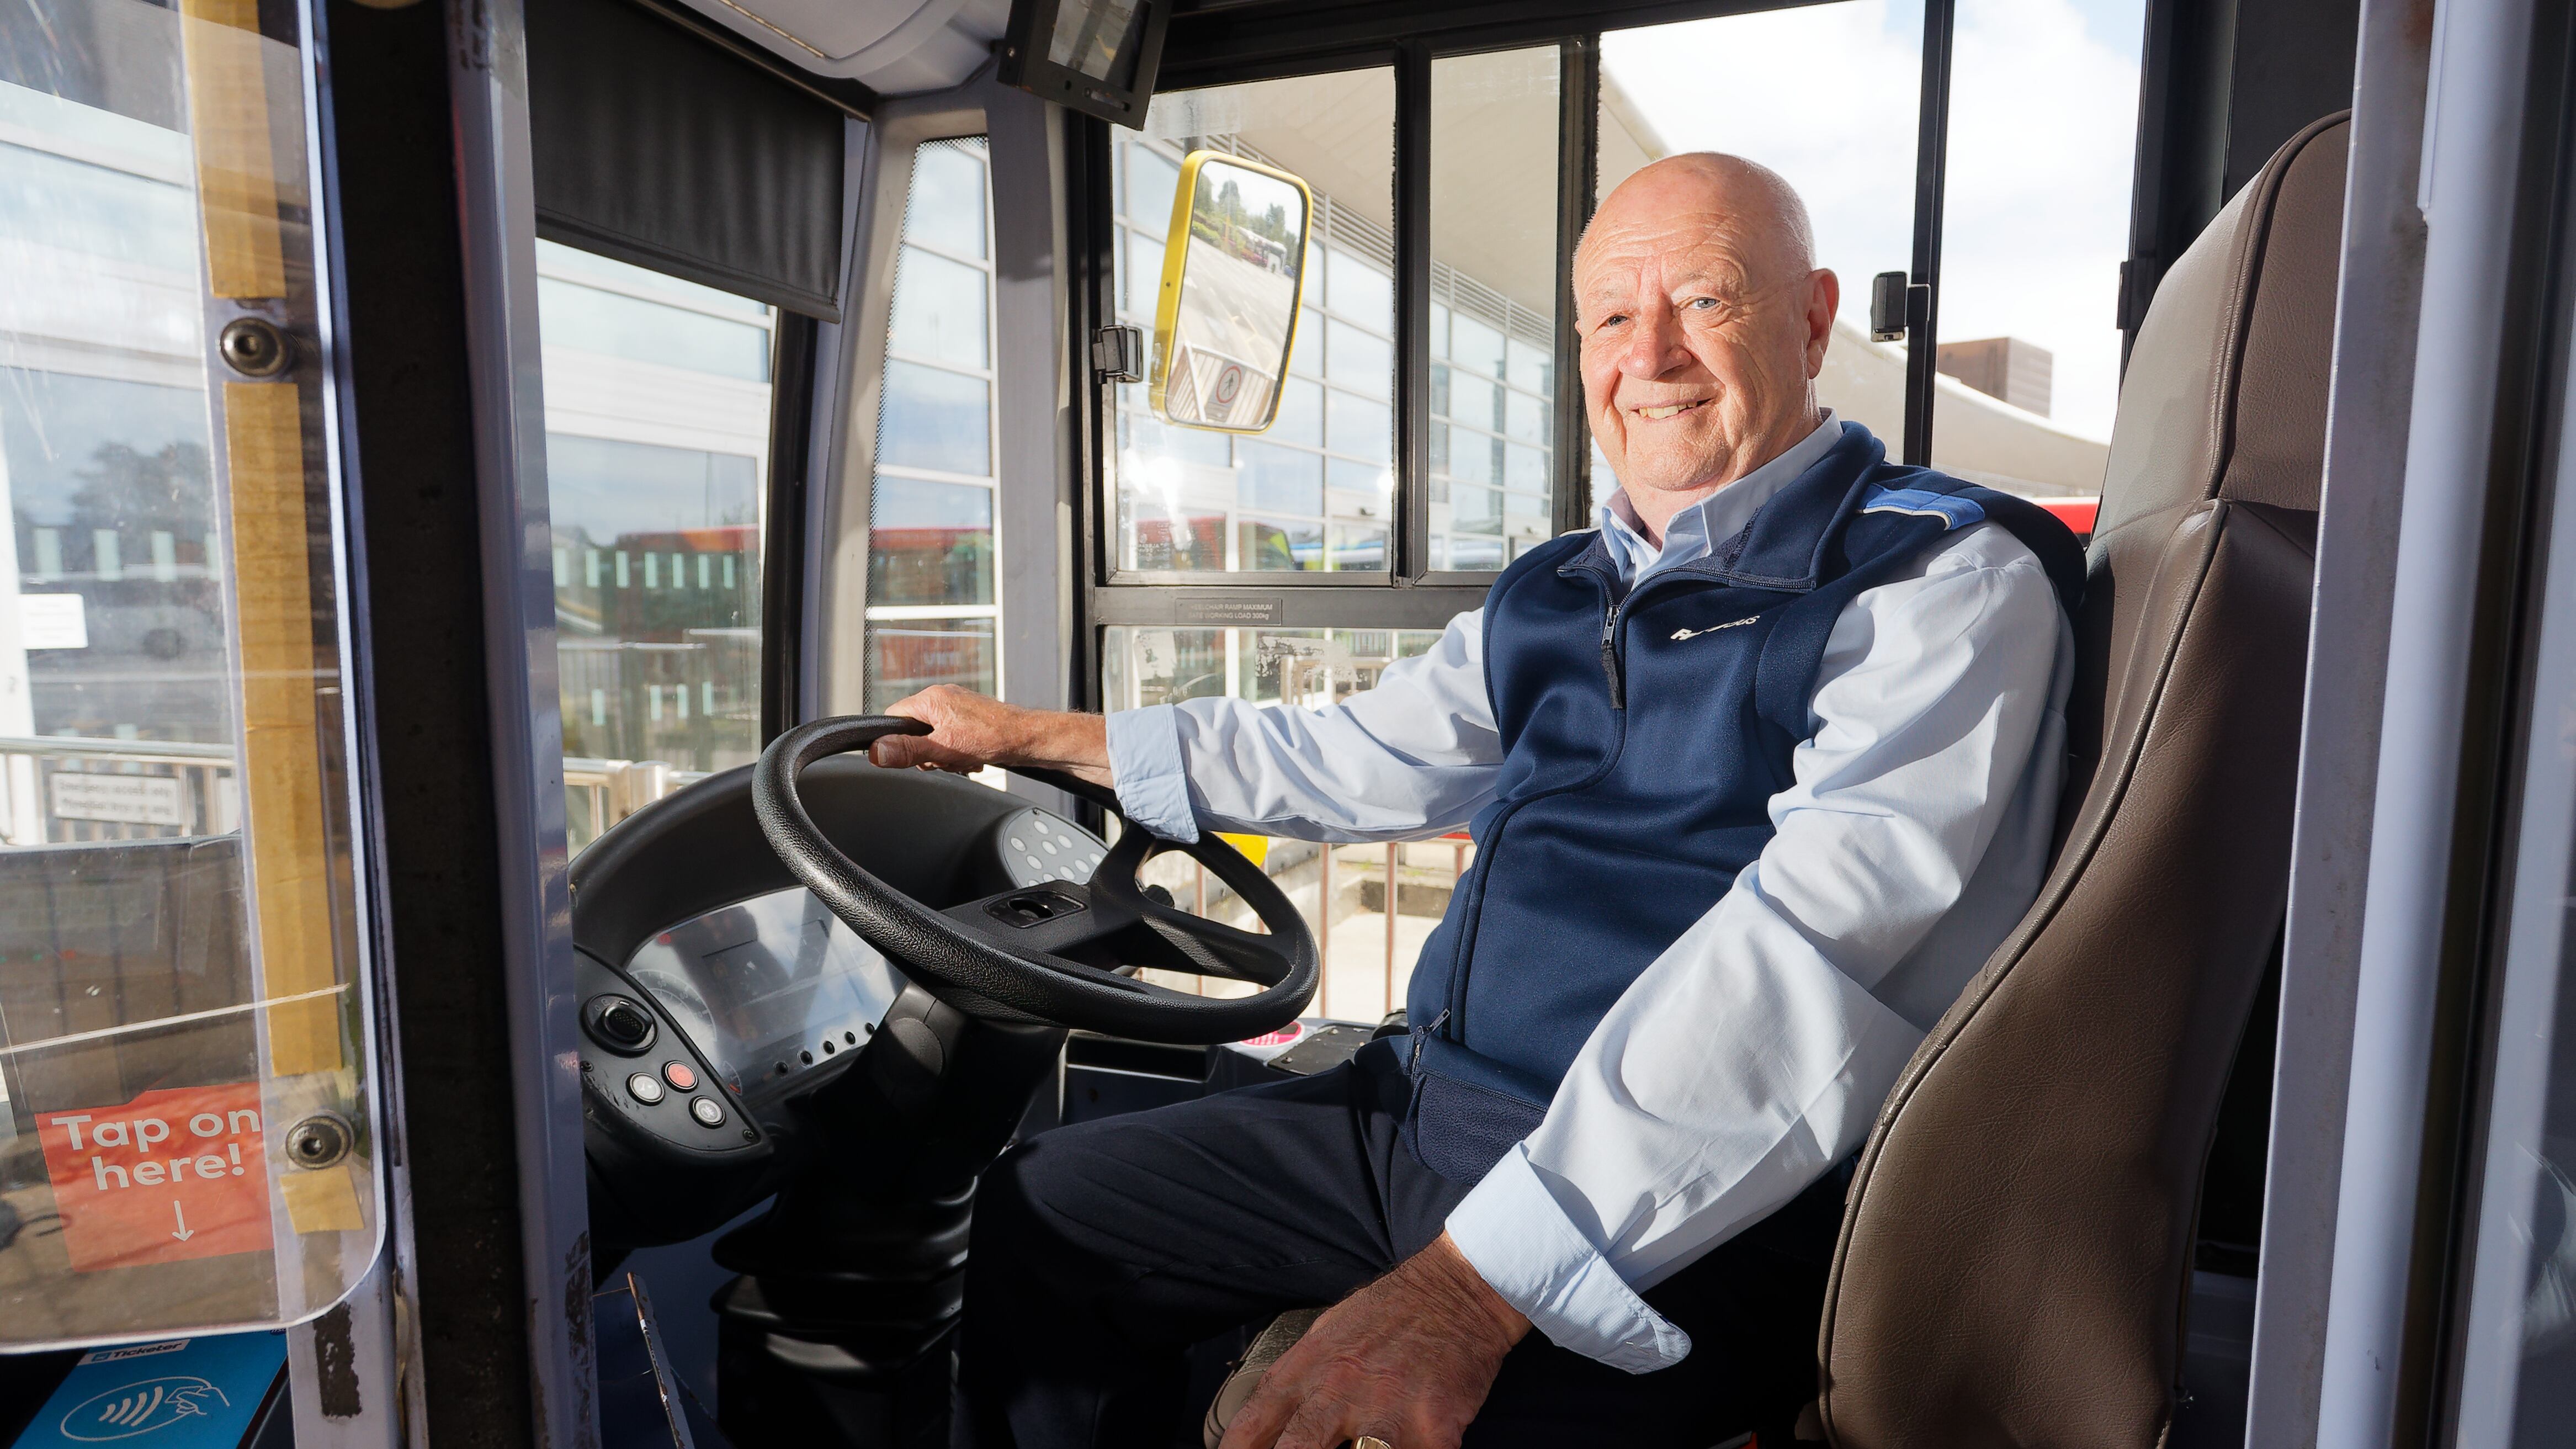 A man believed to be the UK’s longest serving bus driver has vowed to stay behind the wheel